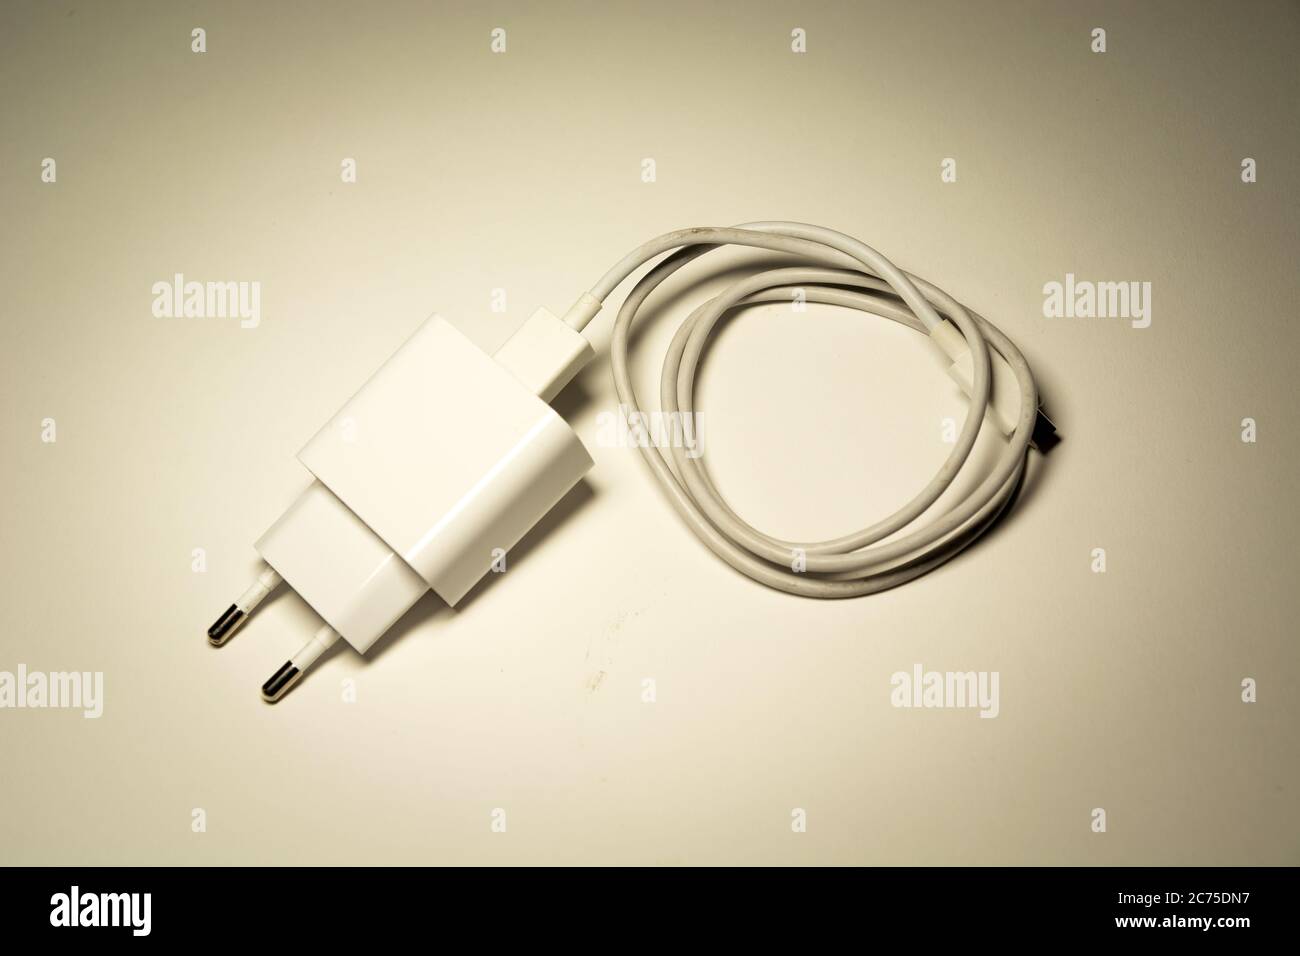 White phone charger with rolled-up cable, top view Stock Photo